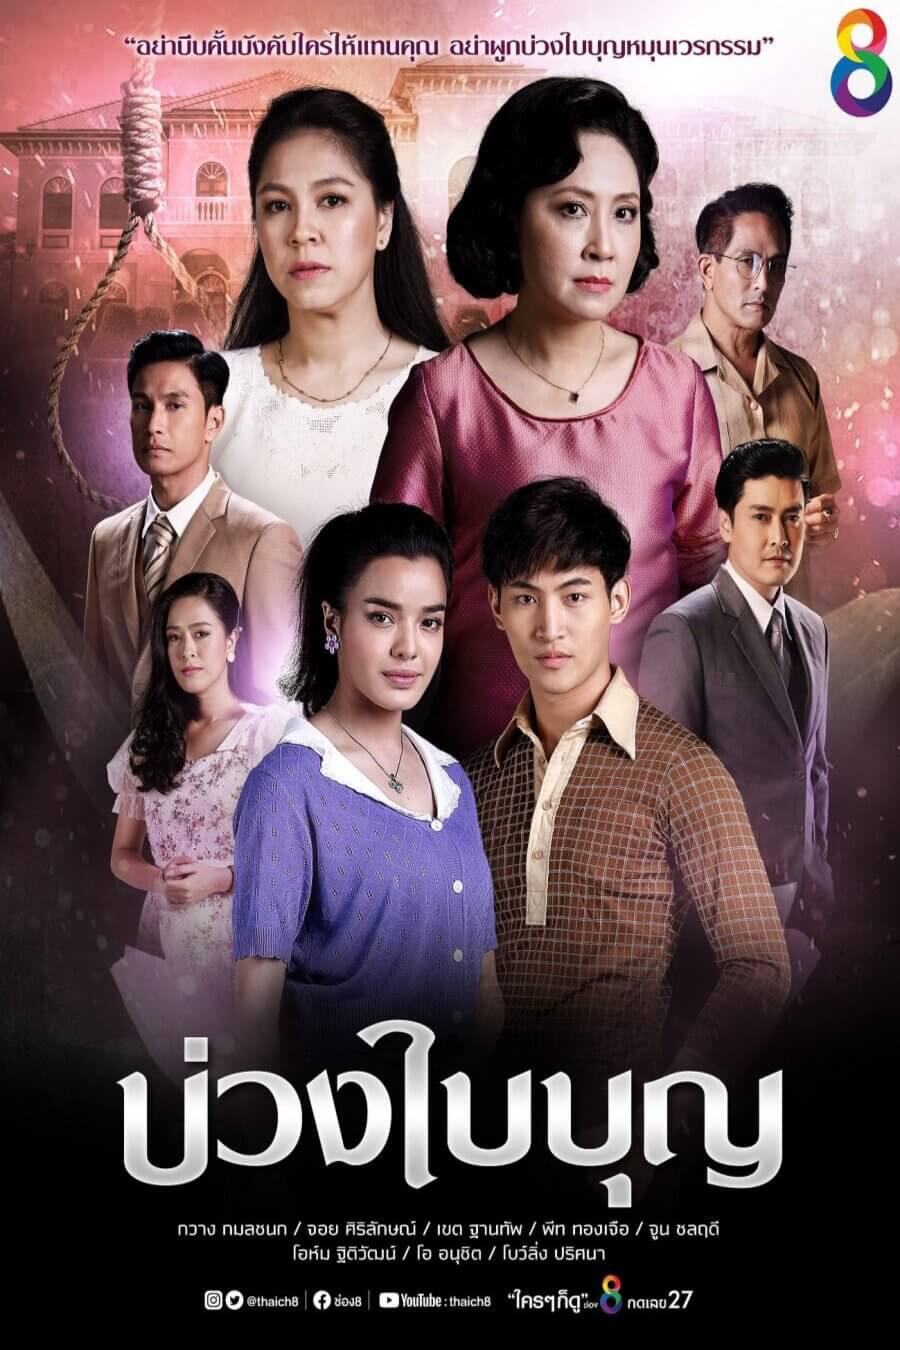 TV ratings for Buang Bai Bun (บ่วงใบบุญ) in Malaysia. Channel 8 TV series